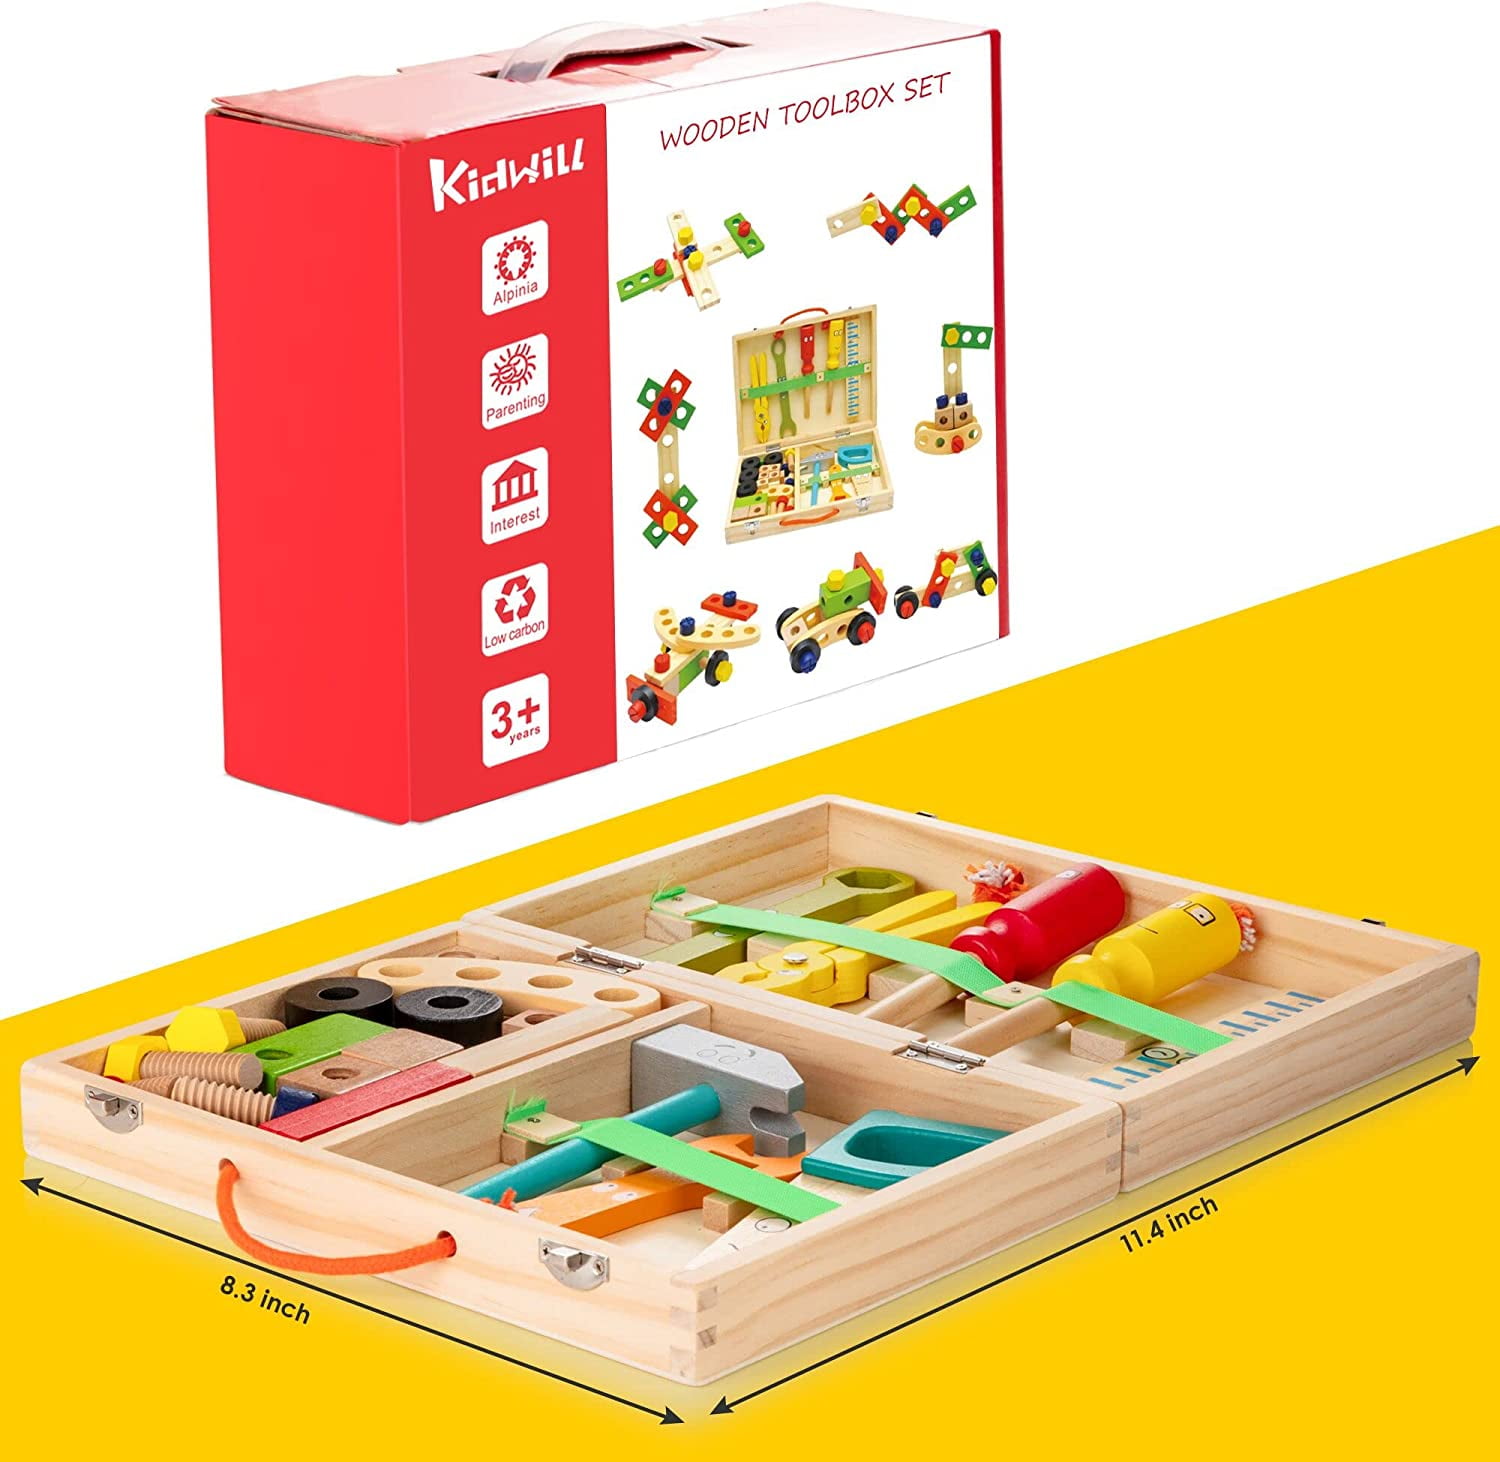 Build and Grow 16-Piece Kid's Tool Kit in the Kids Tool Kits department at